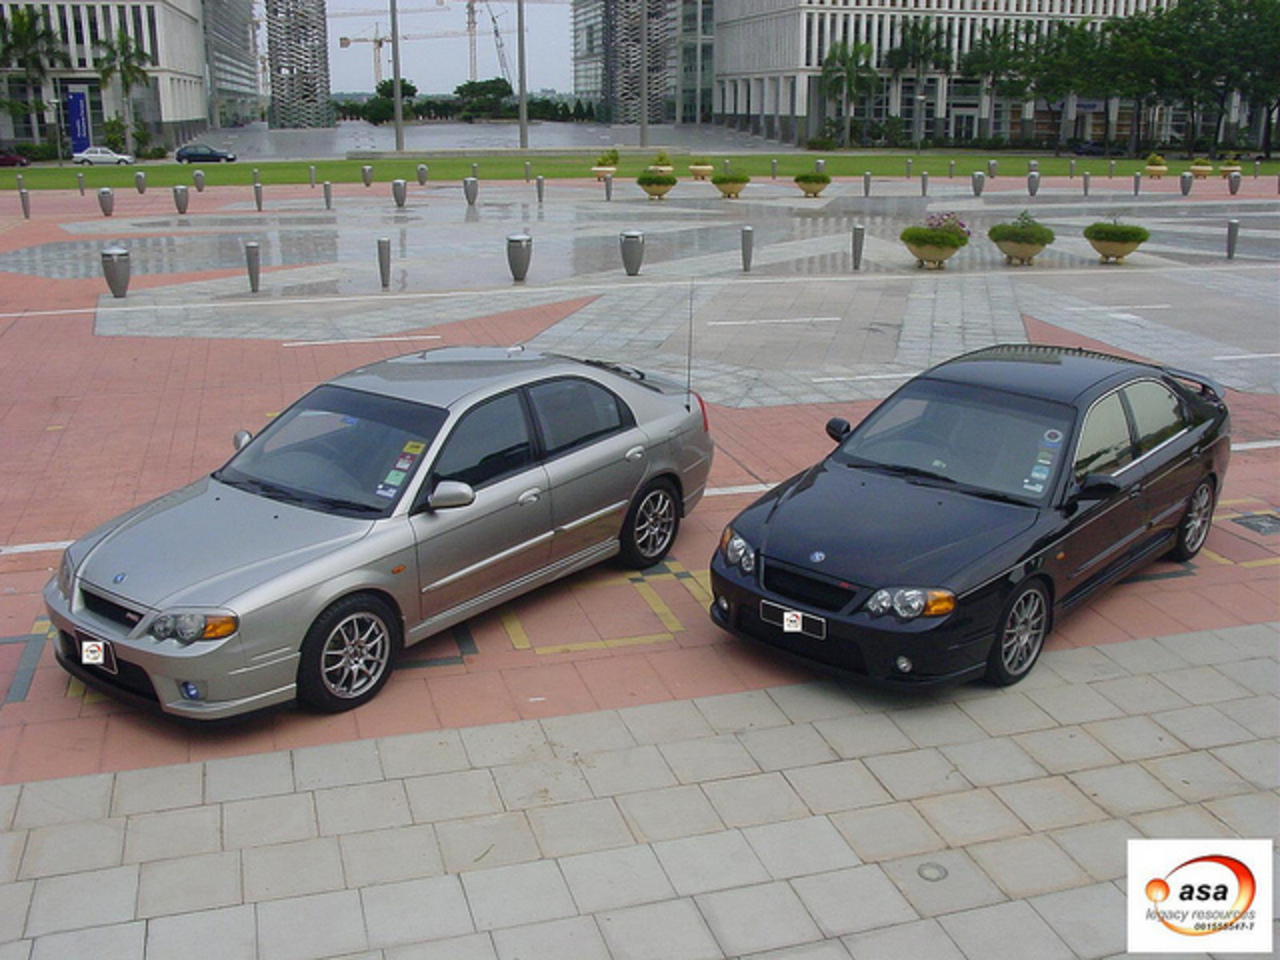 The Twins (KIA Spectra RS Bumper) | Flickr - Photo Sharing!